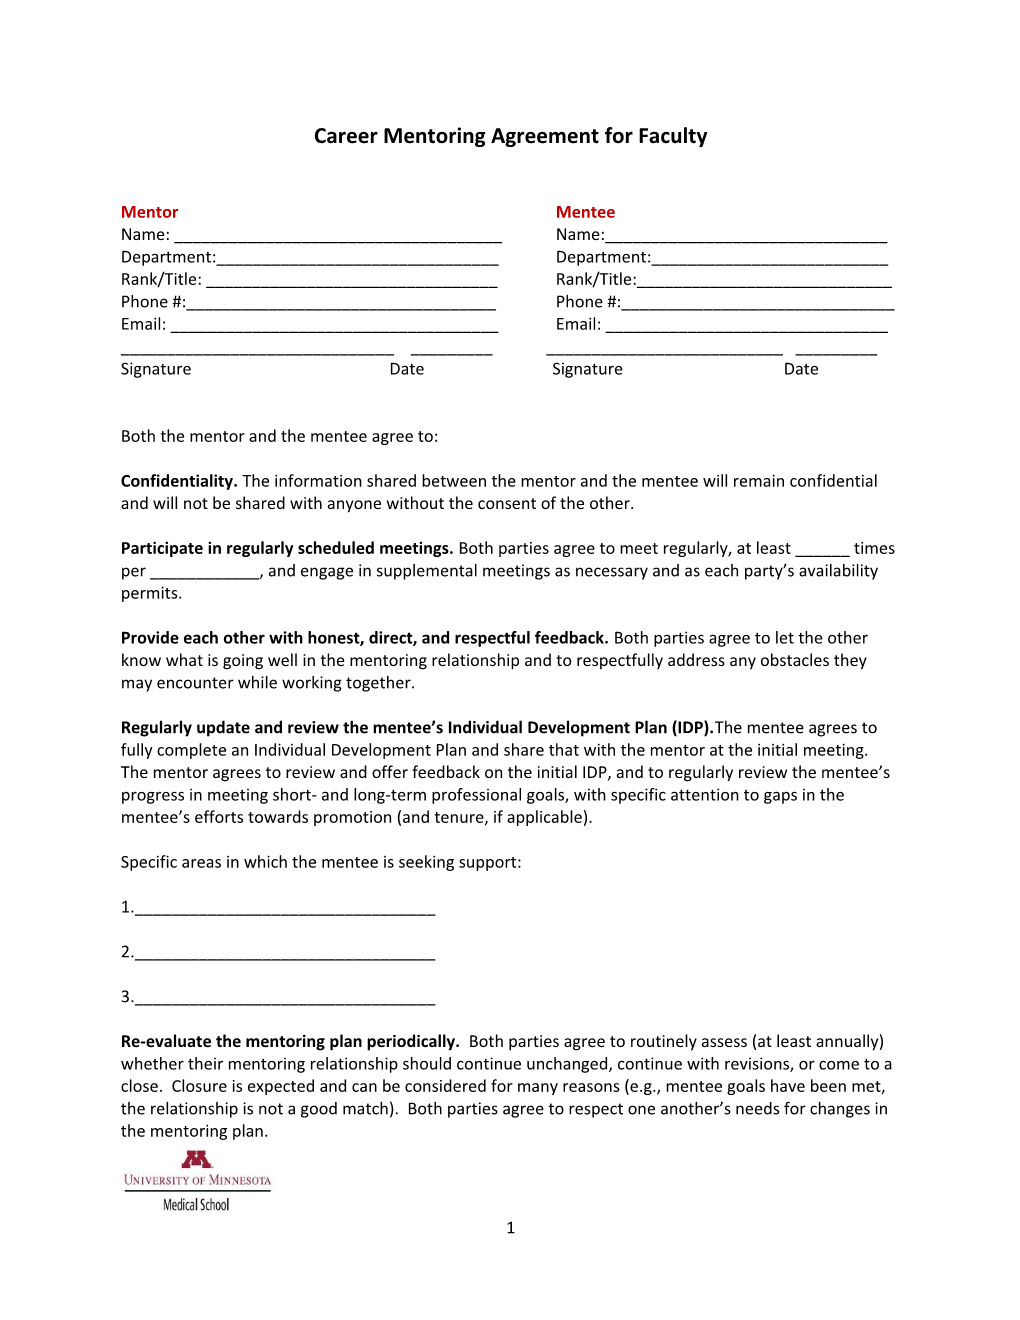 Career Mentoring Agreement for Faculty